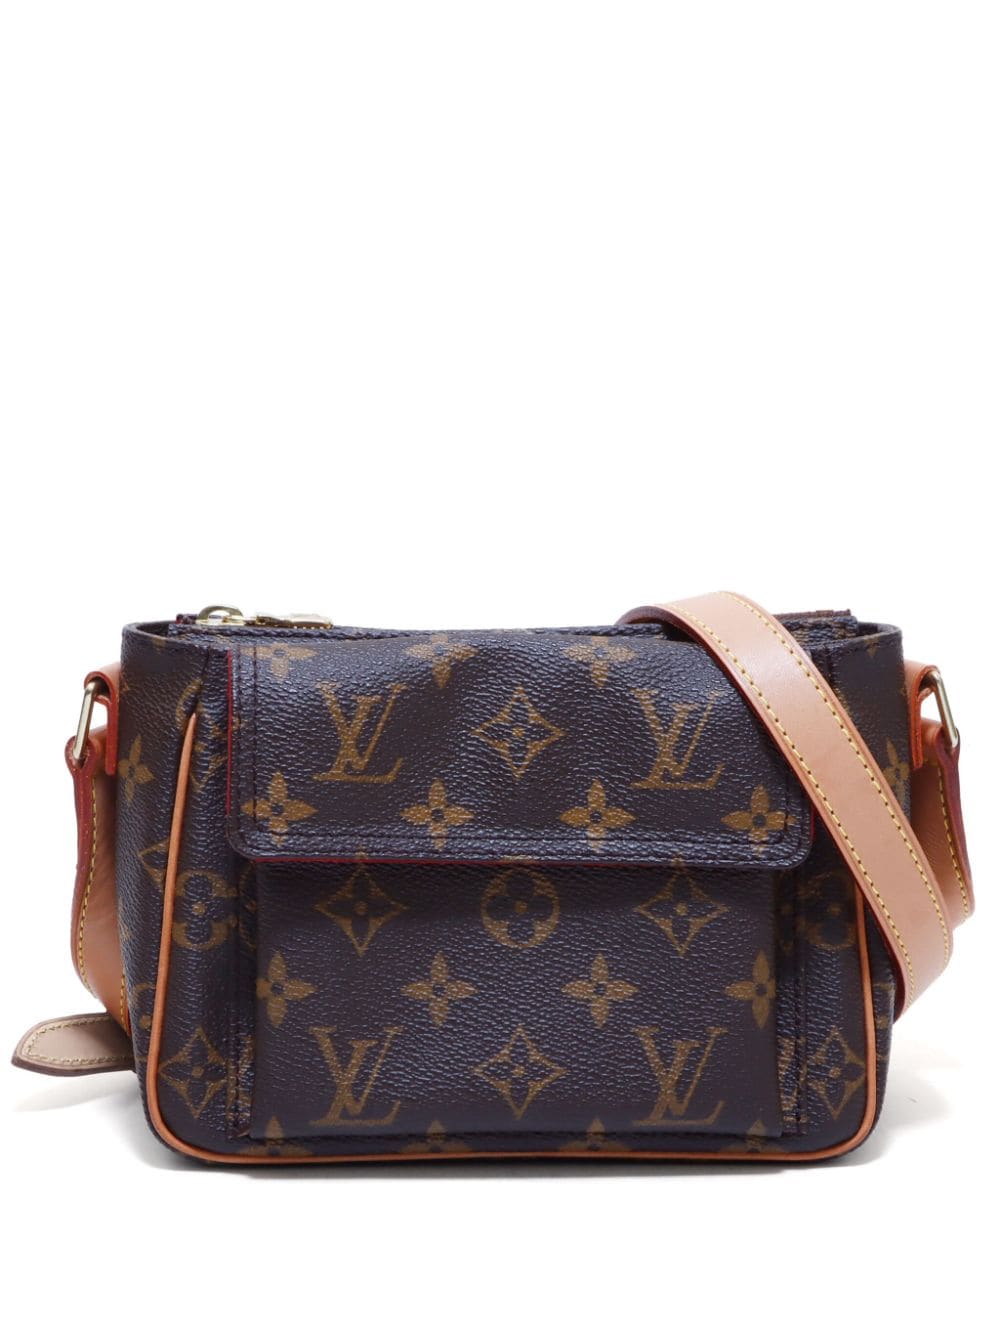 Pre-owned Louis Vuitton 2000s Viva Cite Pm Shoulder Bag In Brown